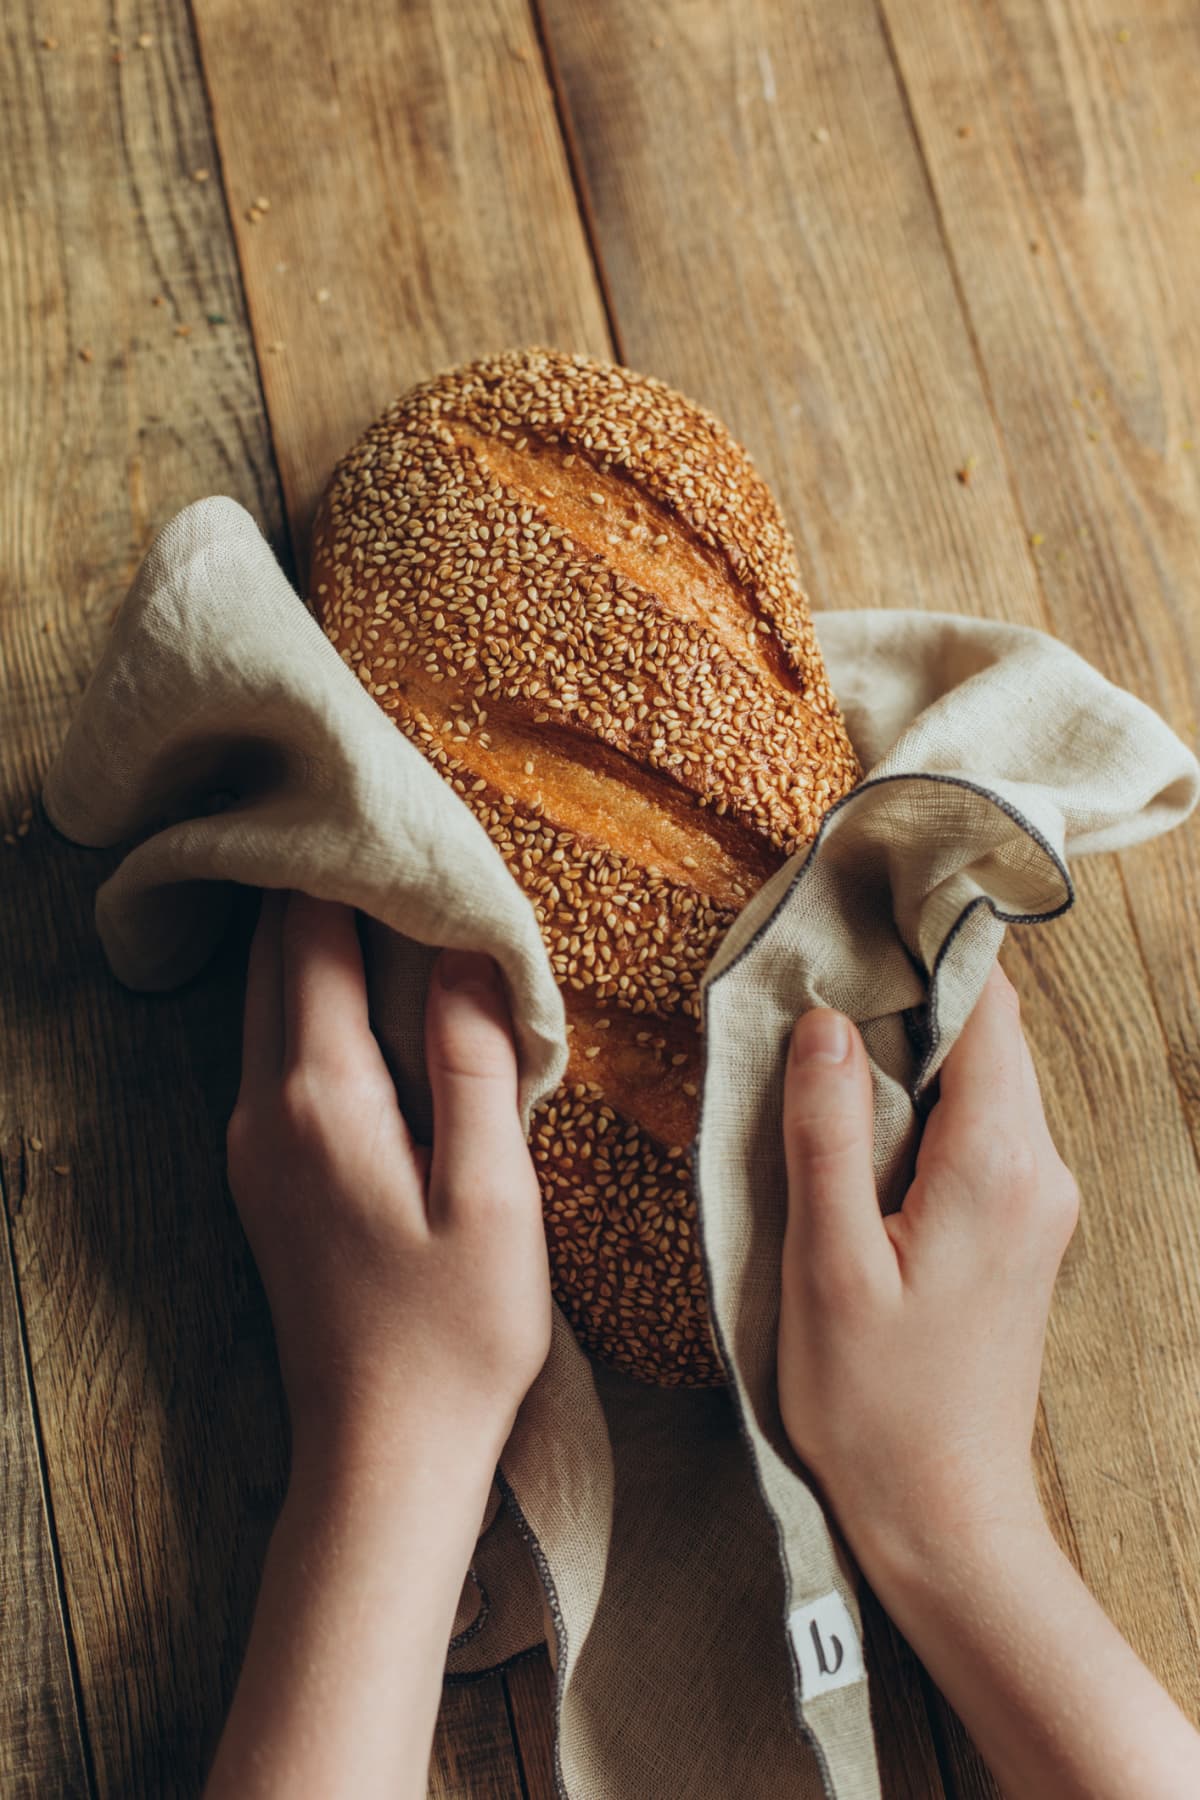 Loaf with sesame seeds, wrapped in a napkin, in children's hands on a wooden table.